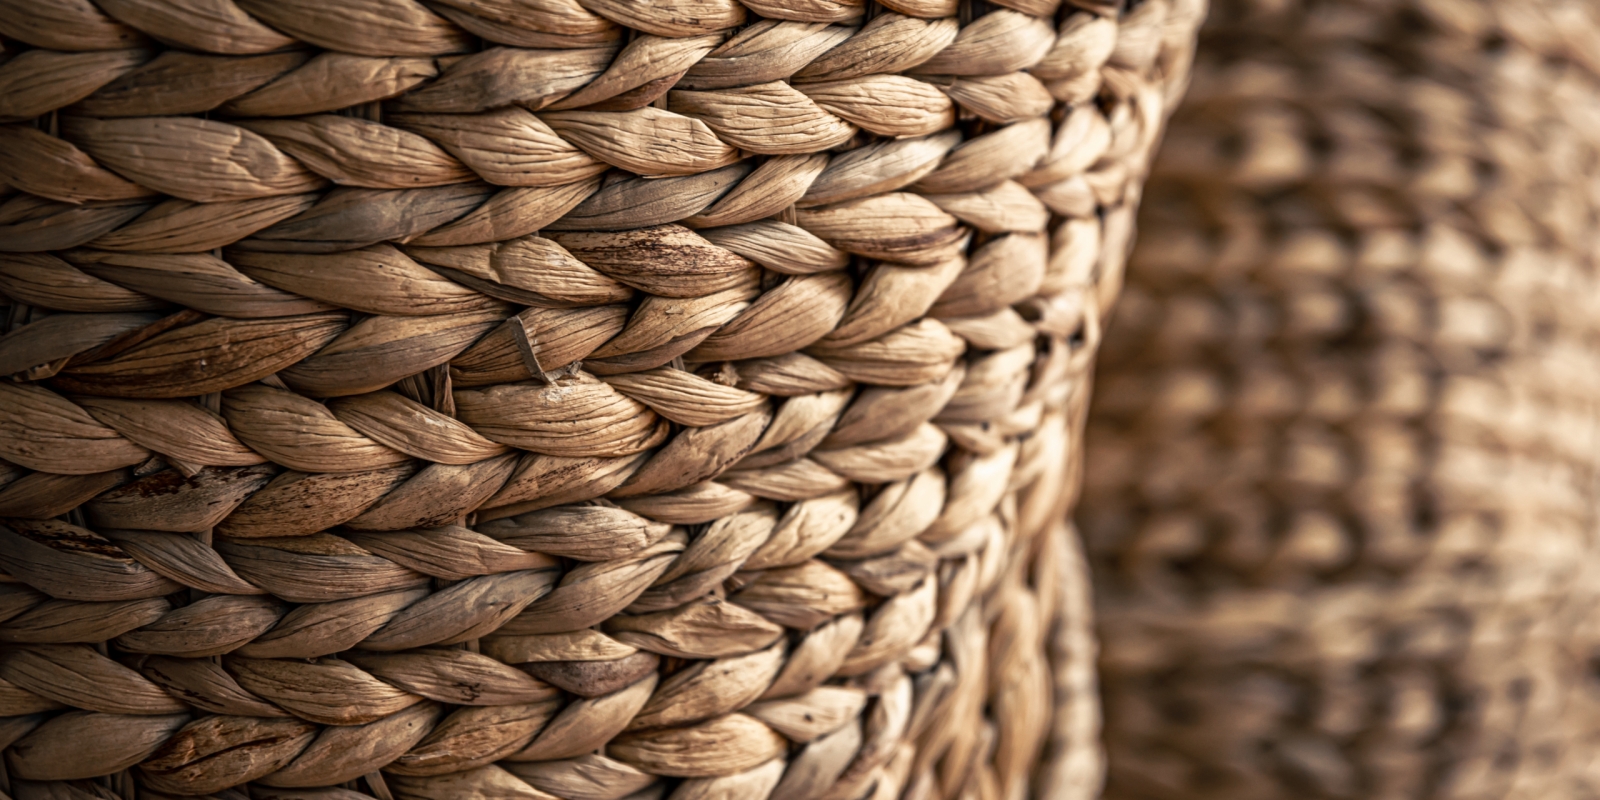 Texture background of wicker baskets made from natural materials.